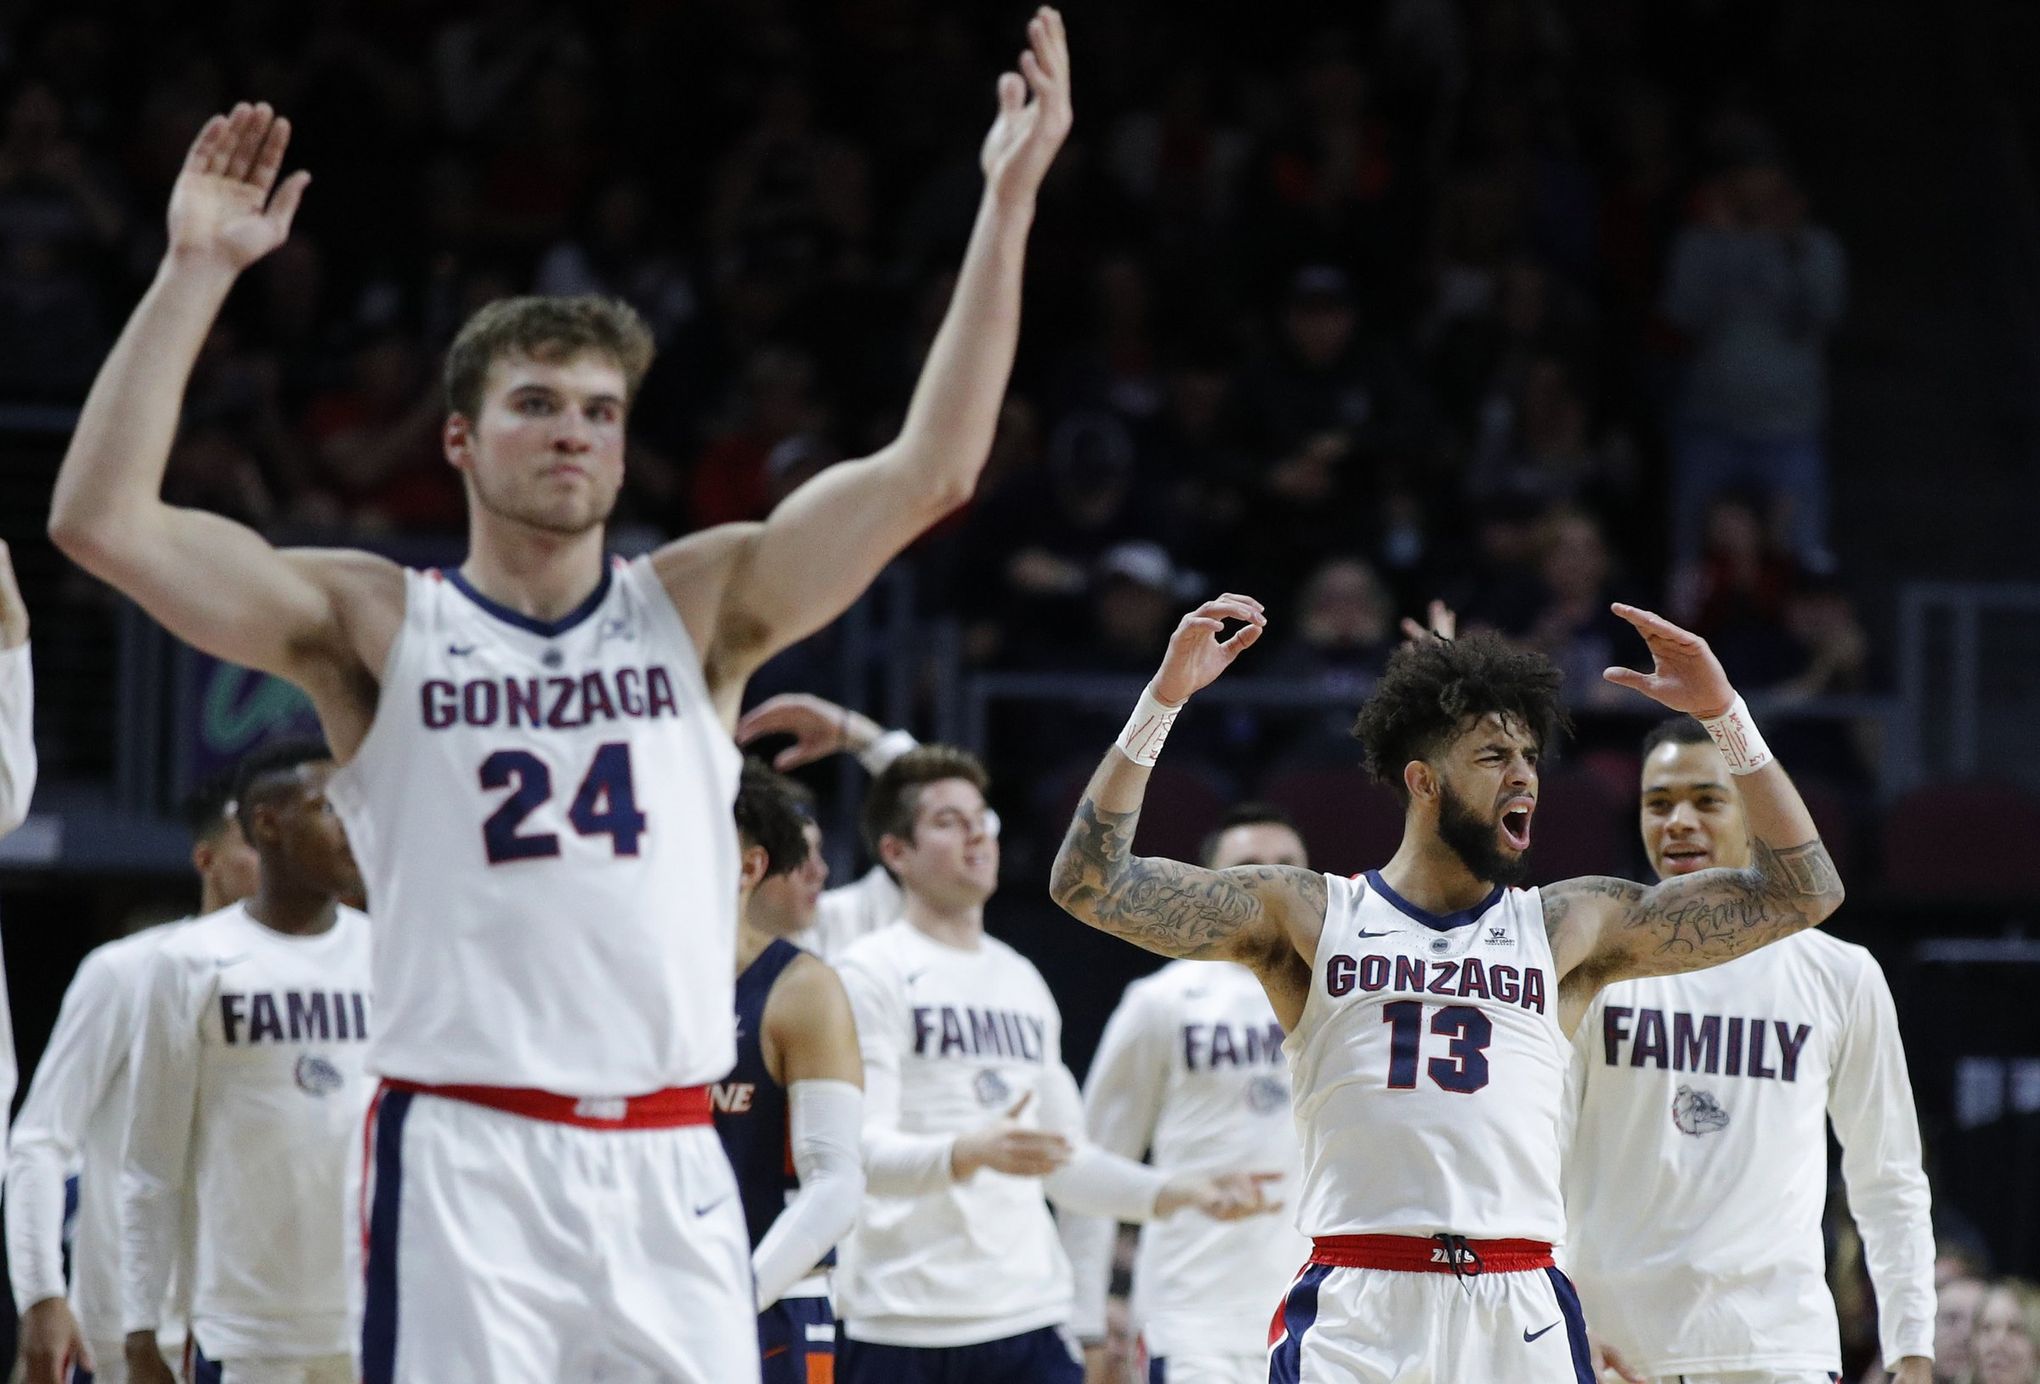 Gonzaga earns No. 1 seed in NCAA tournament for third time in program history The Seattle Times